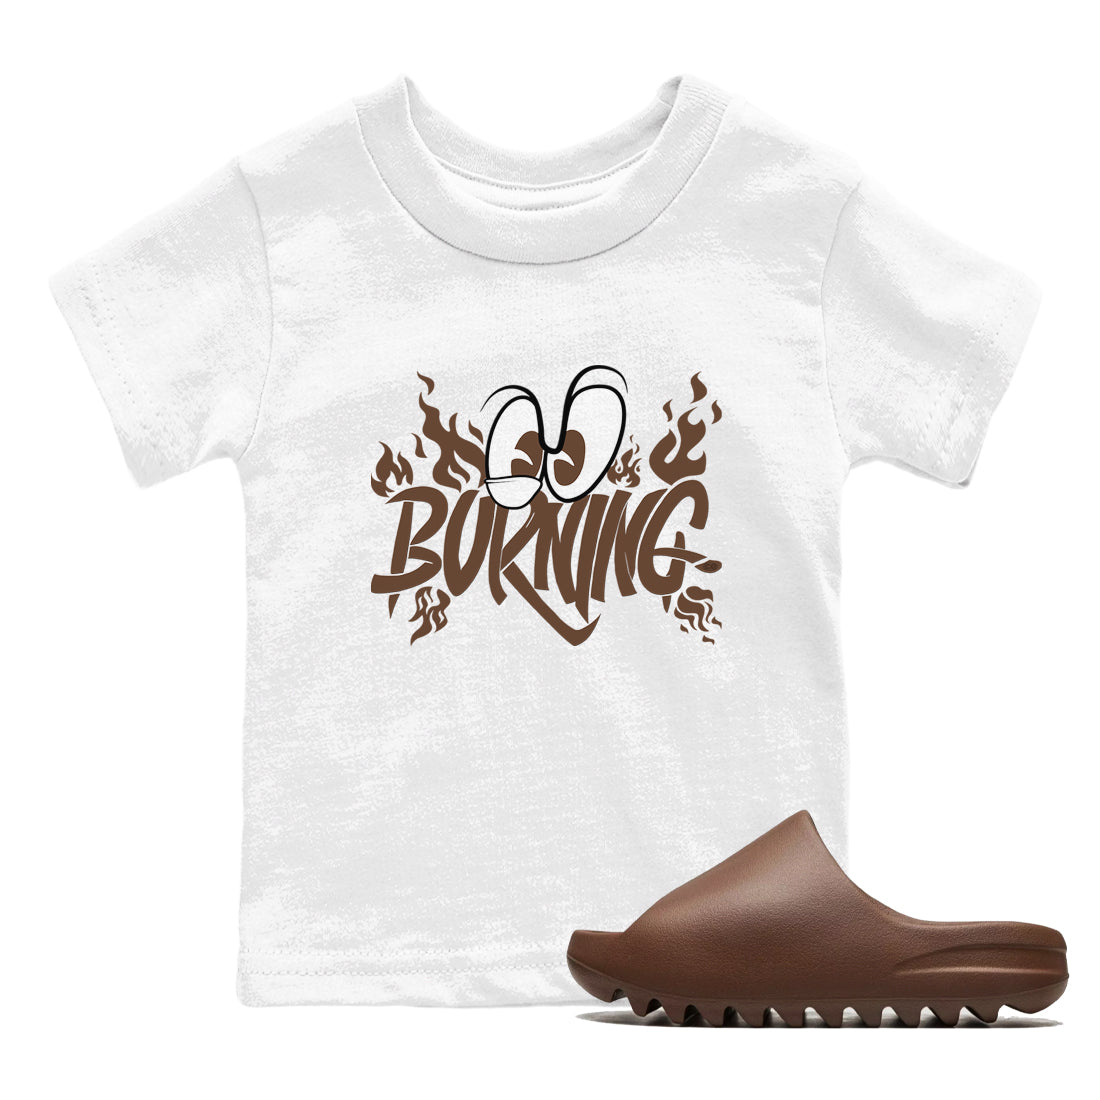 Yeezy Slide Flax shirts to match jordans Burning sneaker match tees Yeezy Slide Flax SNRT Sneaker Tees streetwear brand Baby and Youth White 1 cotton tee